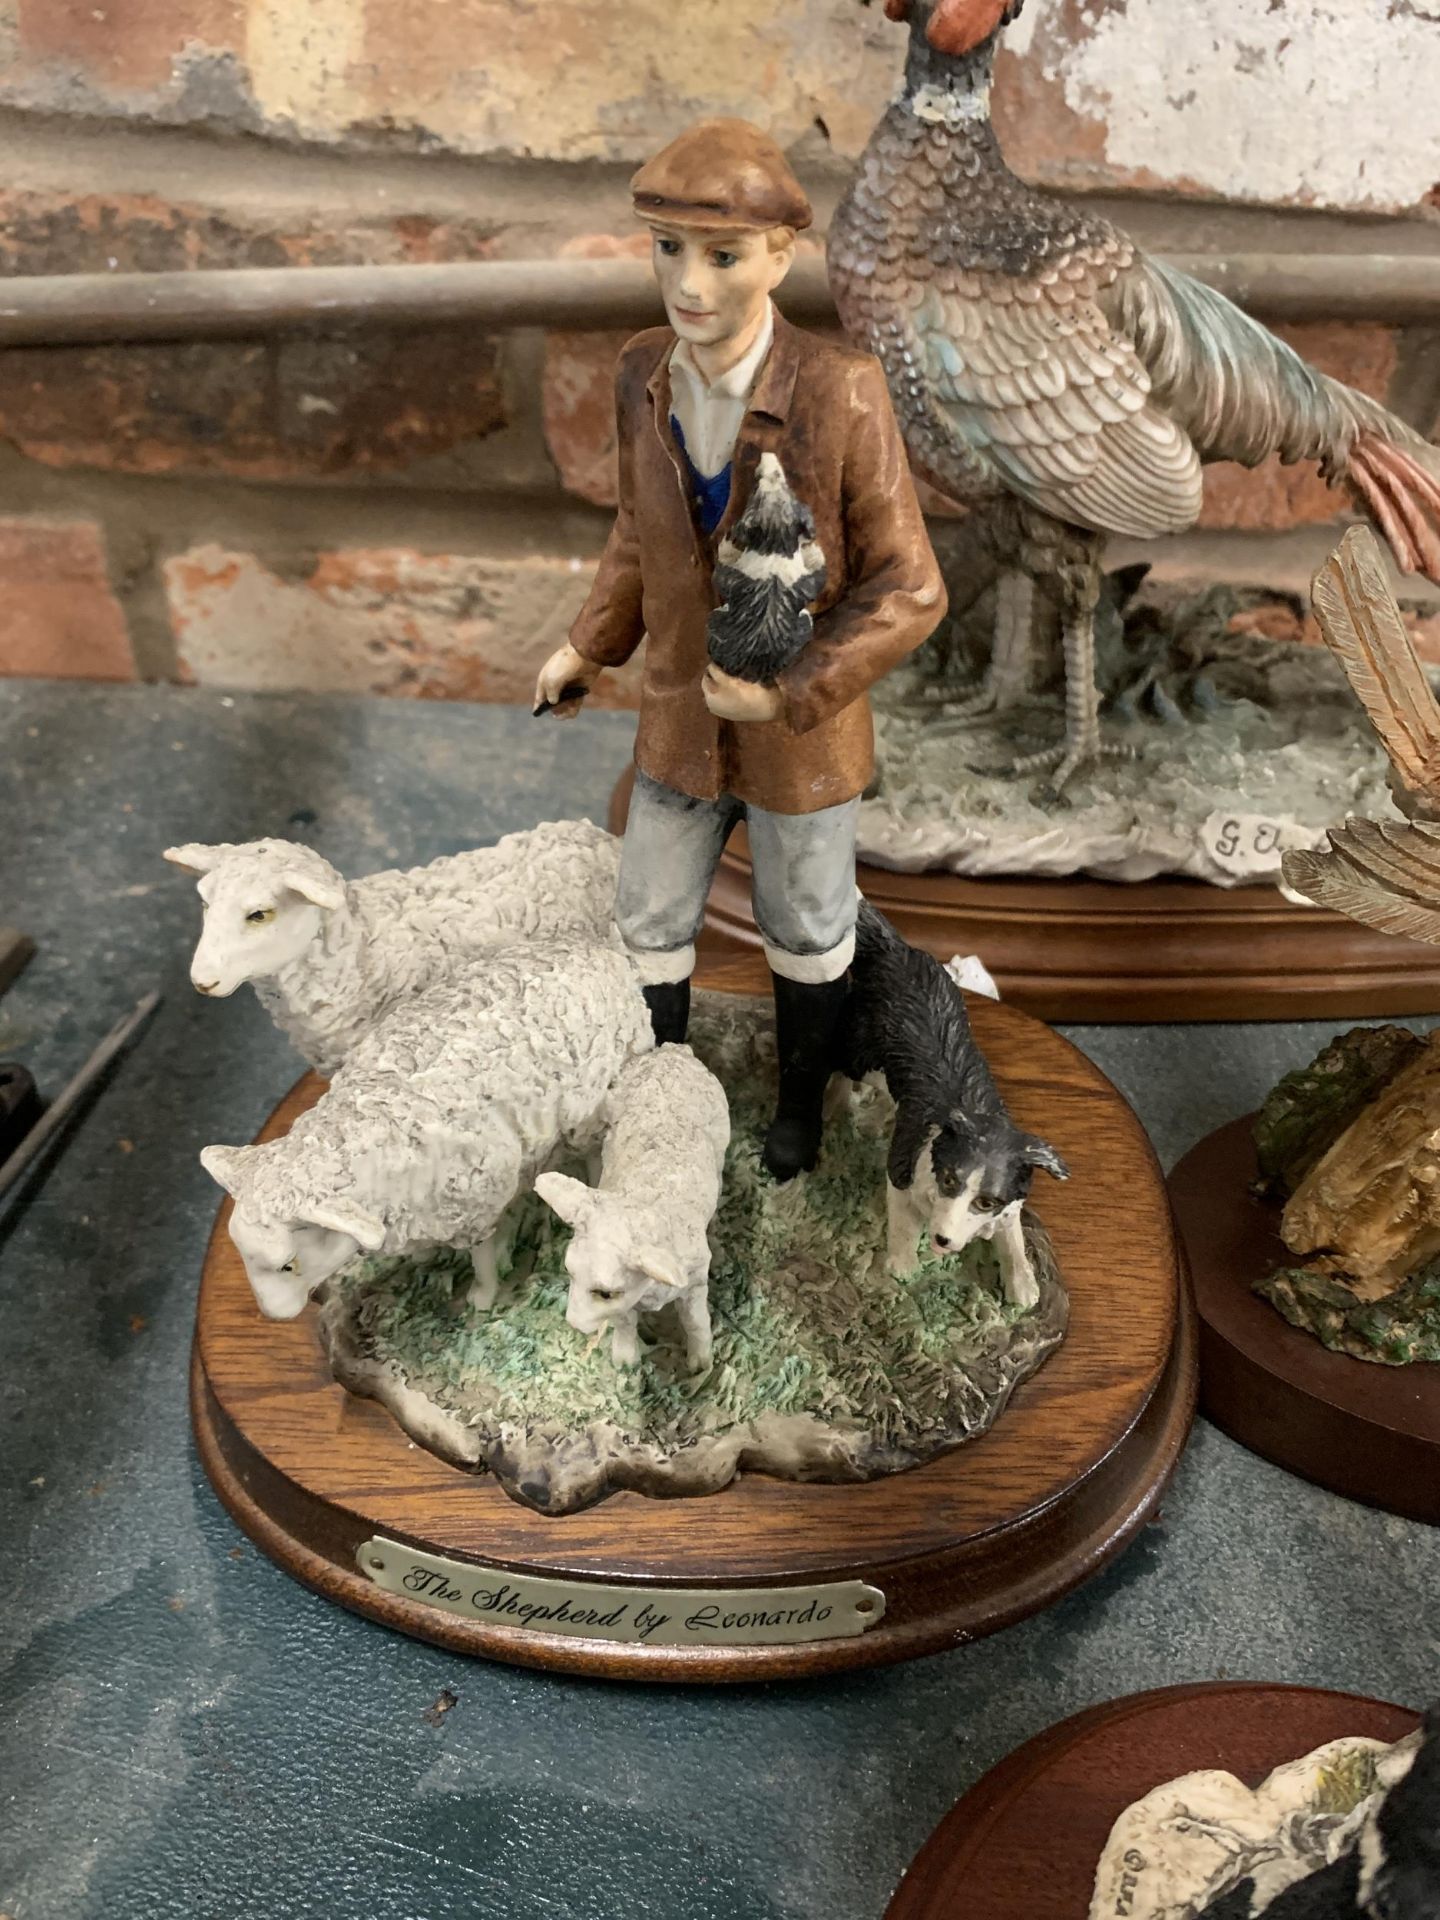 A LARGE MIXED LOT OF ANIMAL ORNAMENT COLLECTABLES TO INCLUDE "THE FULIANA COLLECTION" "LEONARDO" ETC - Image 2 of 5